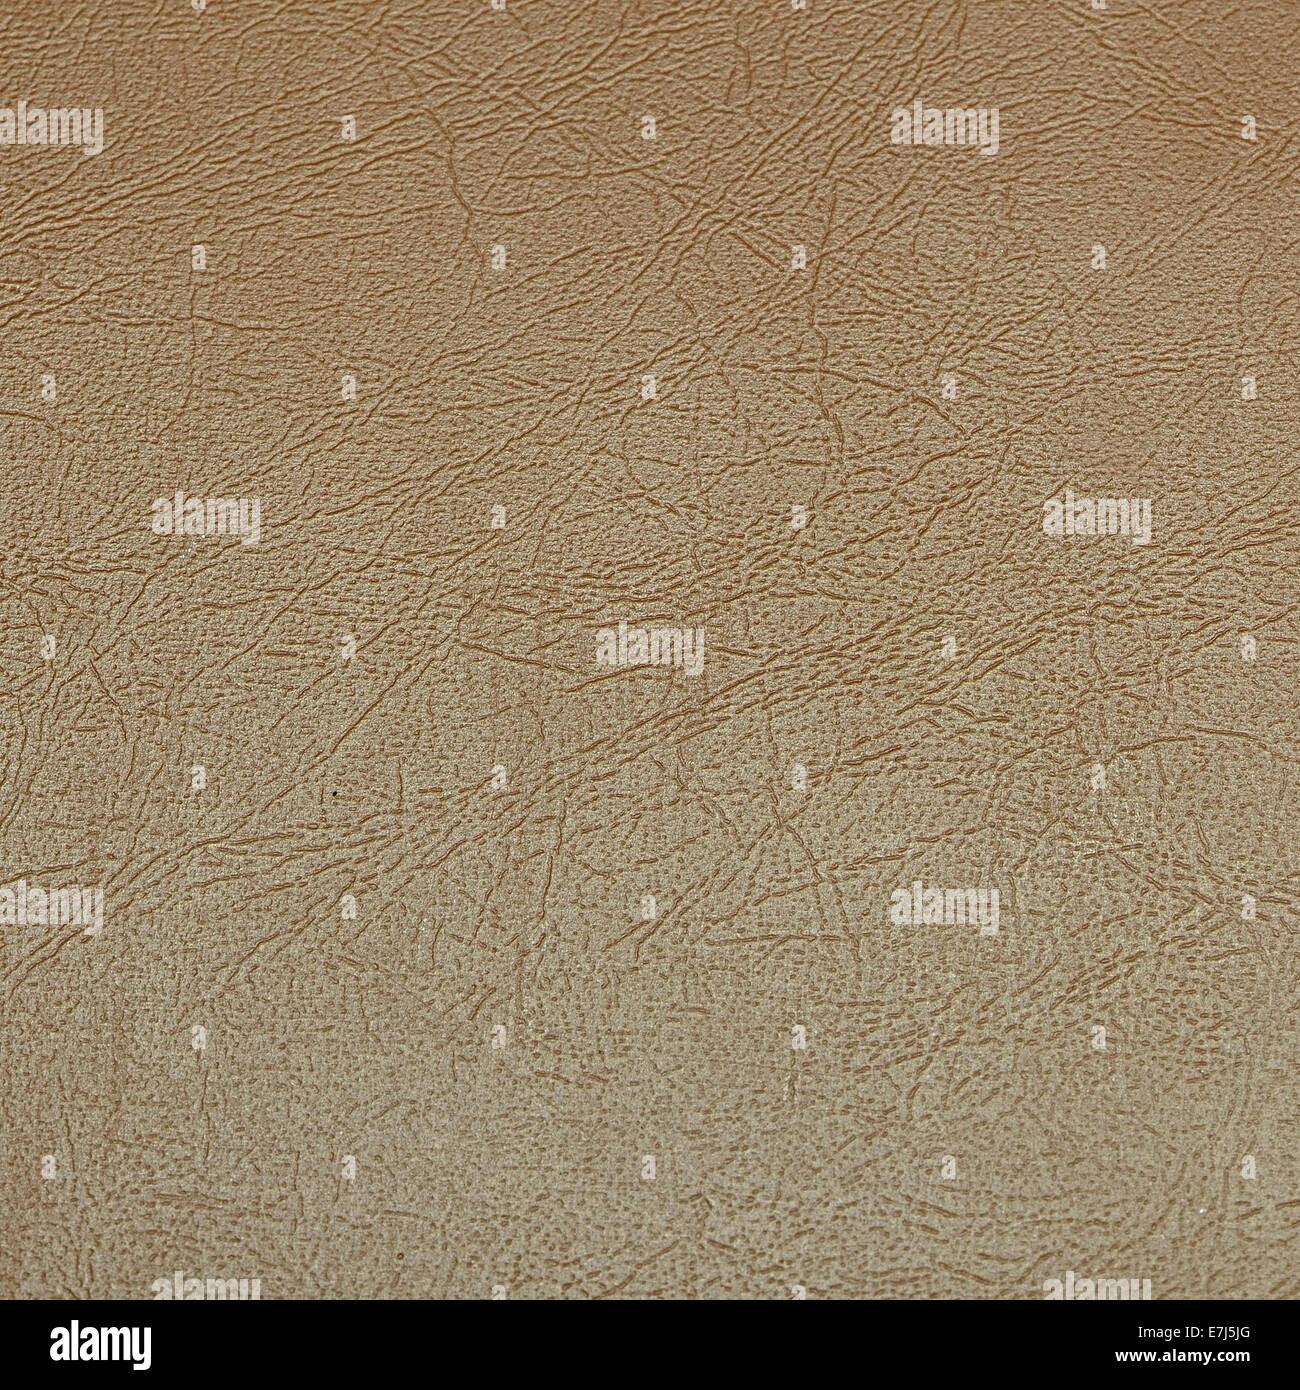 Brown paper texture background pattern, filter image Stock Photo